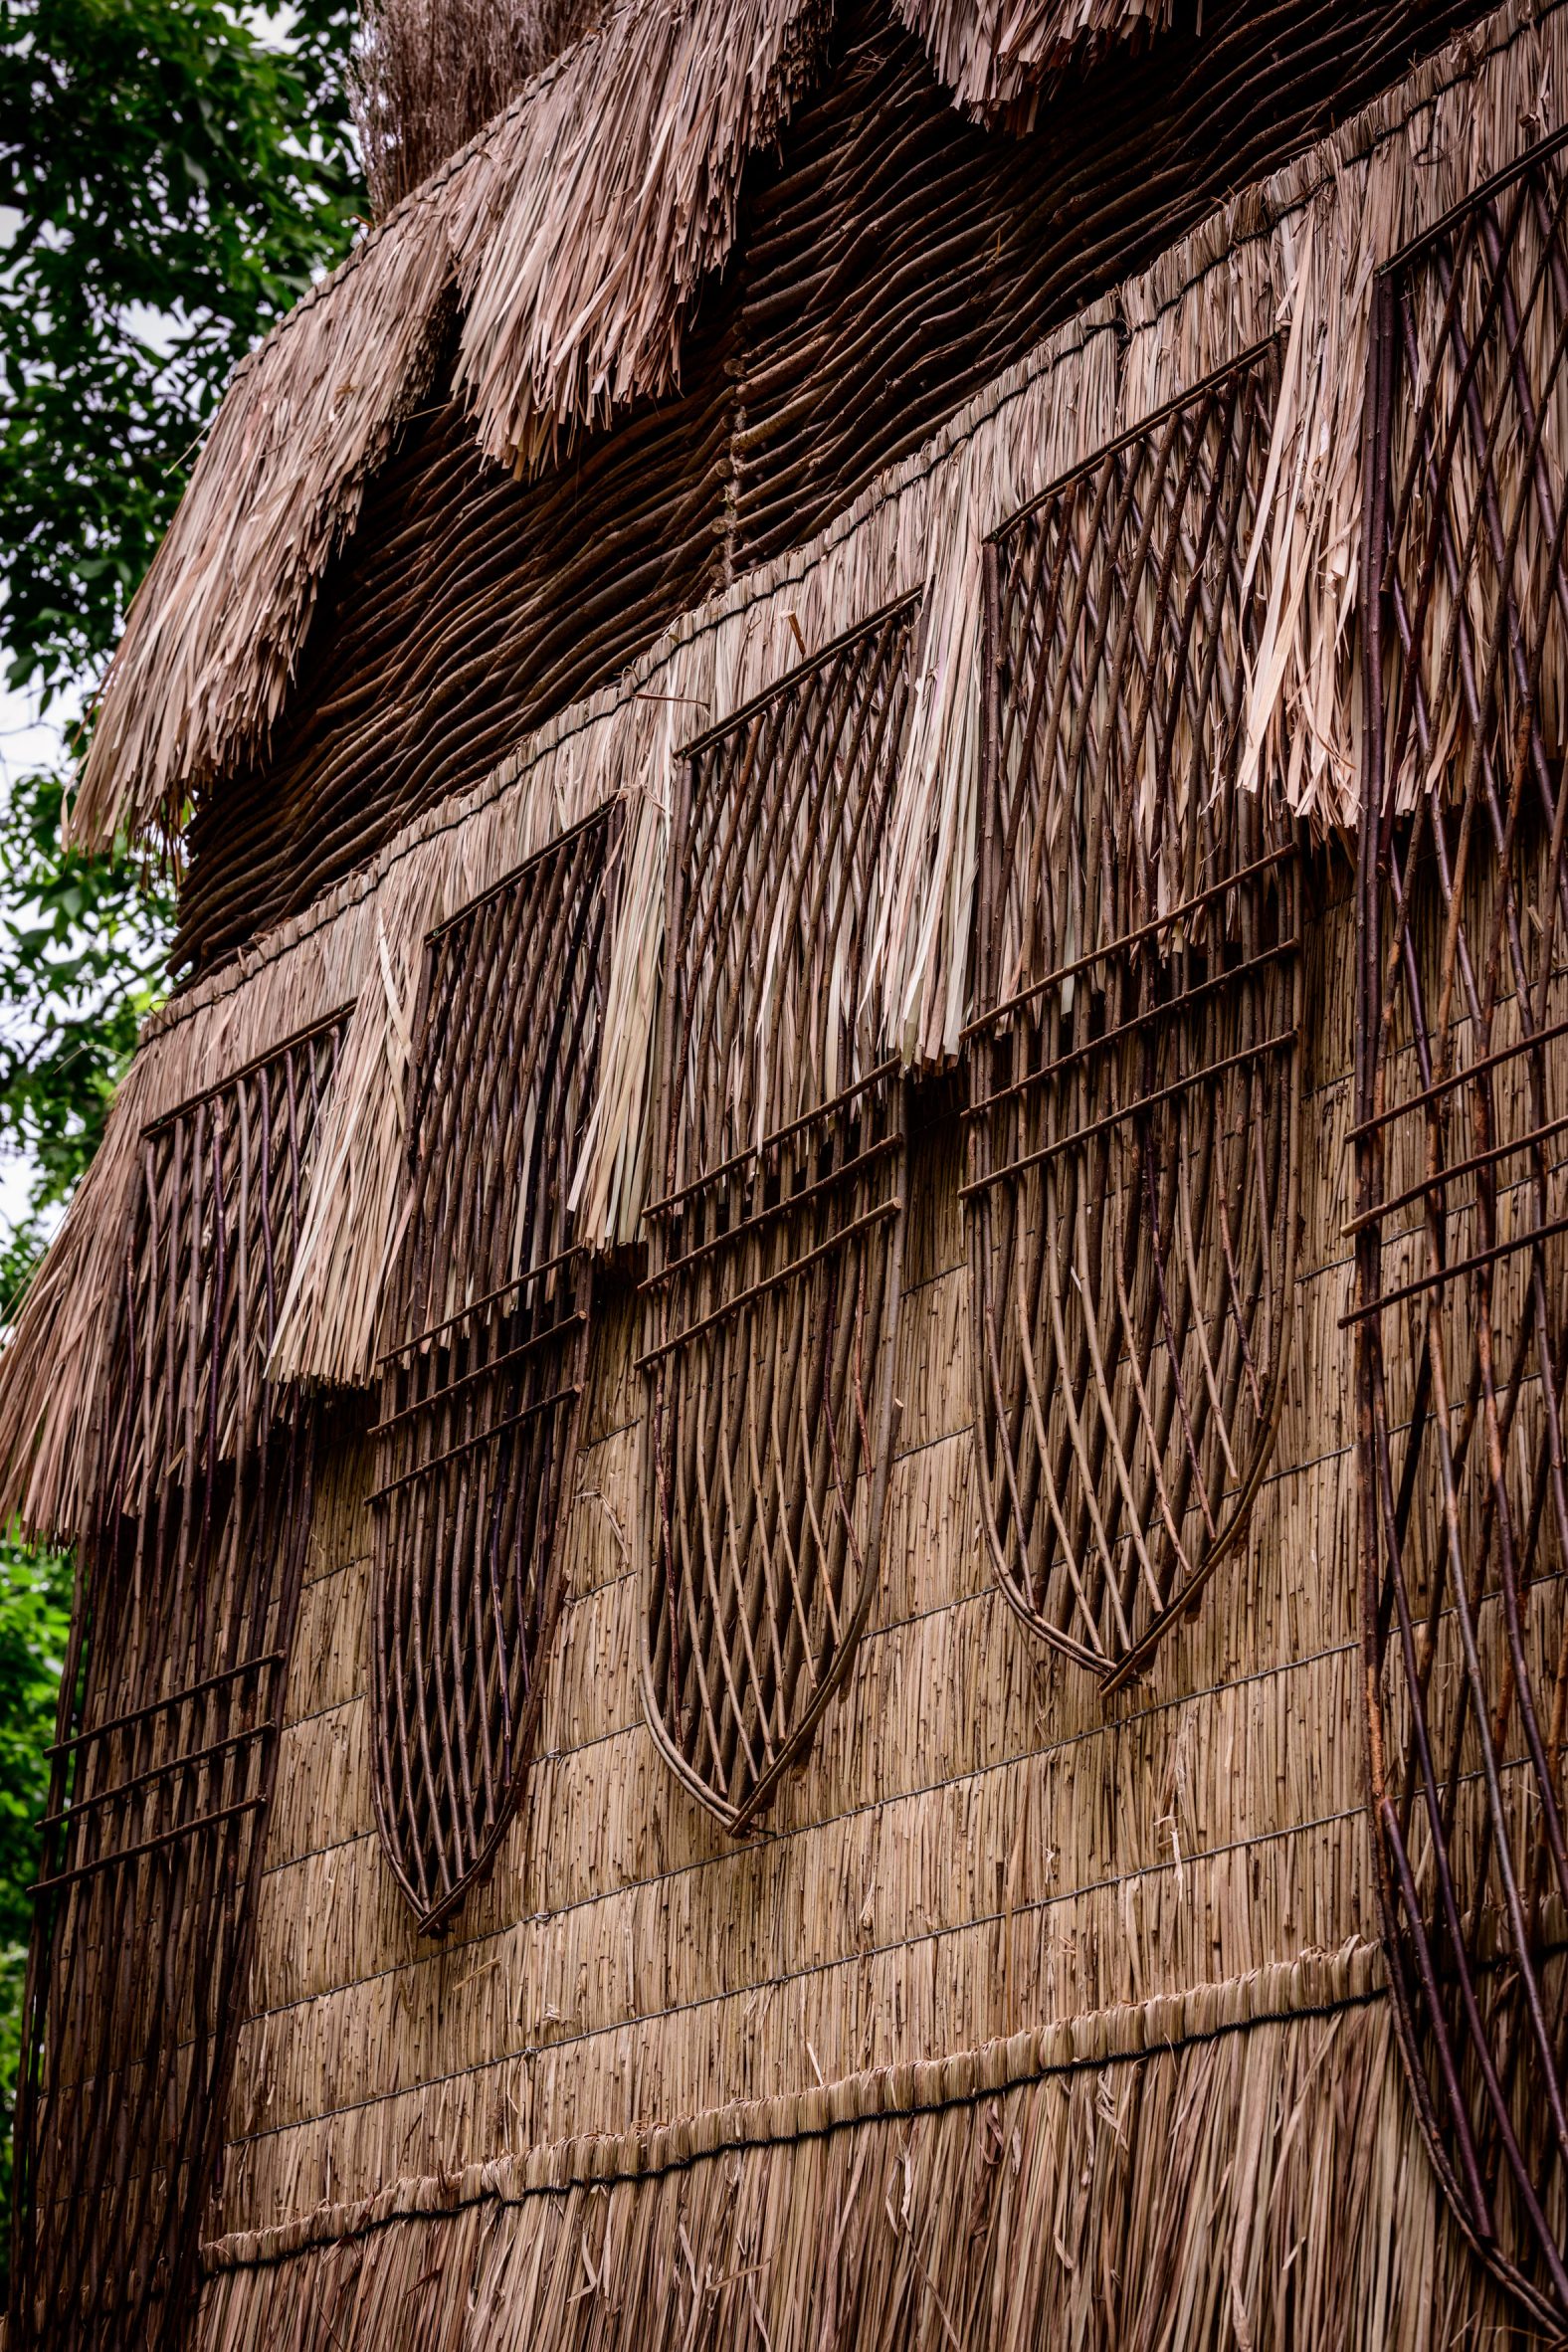 Pavilion walls made from woven hazel branches and reed